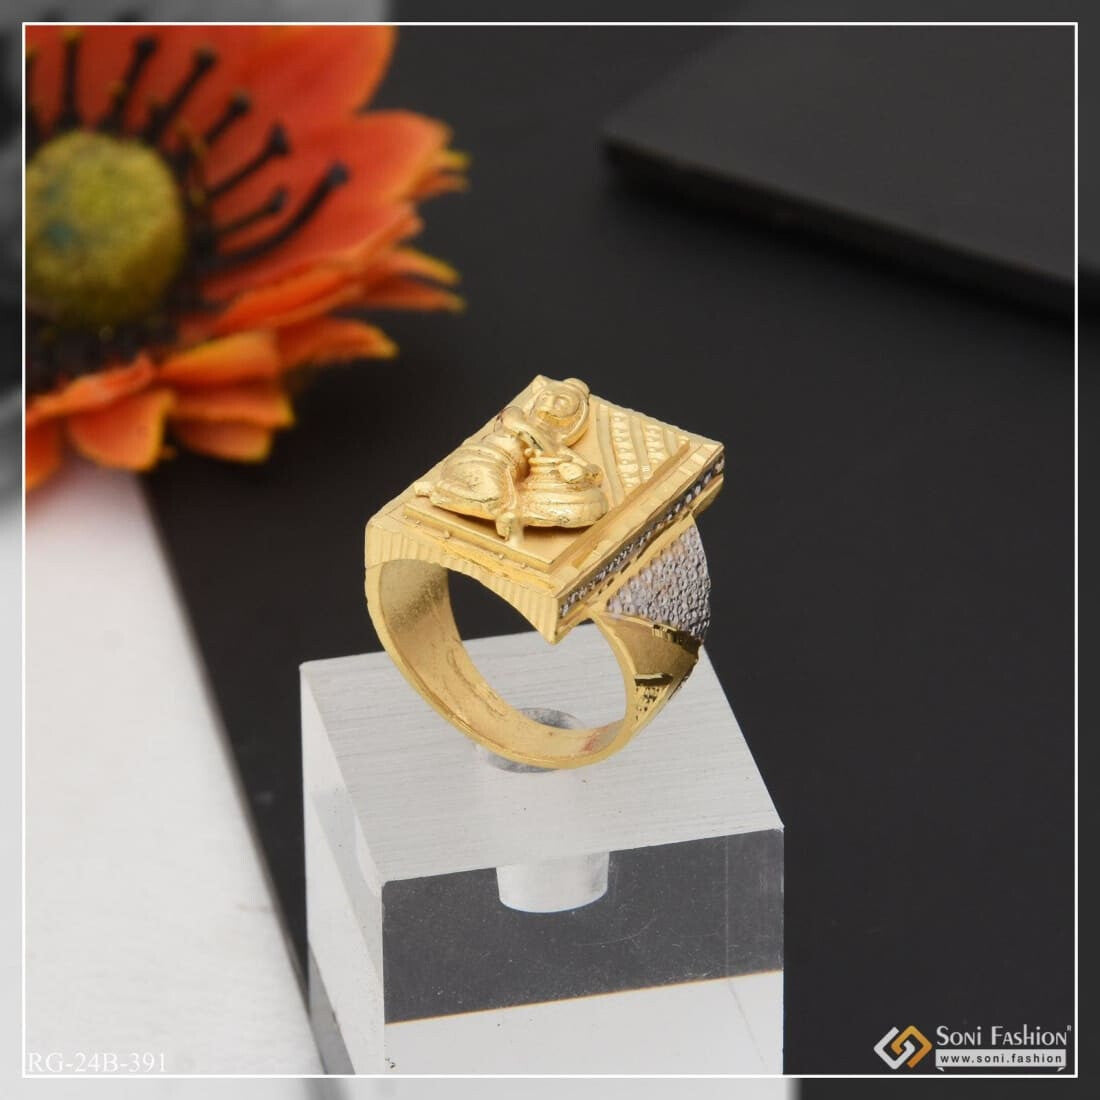 Certified Bis Hallmark 22kt Gold Guinea Ring For Luxury And Style 1 Piece  With Hallmark Certificate. at Rs 36876 | सोने की अंगूठी - The Rajlaxmi  Jewellers, Kolkata | ID: 2849389803391